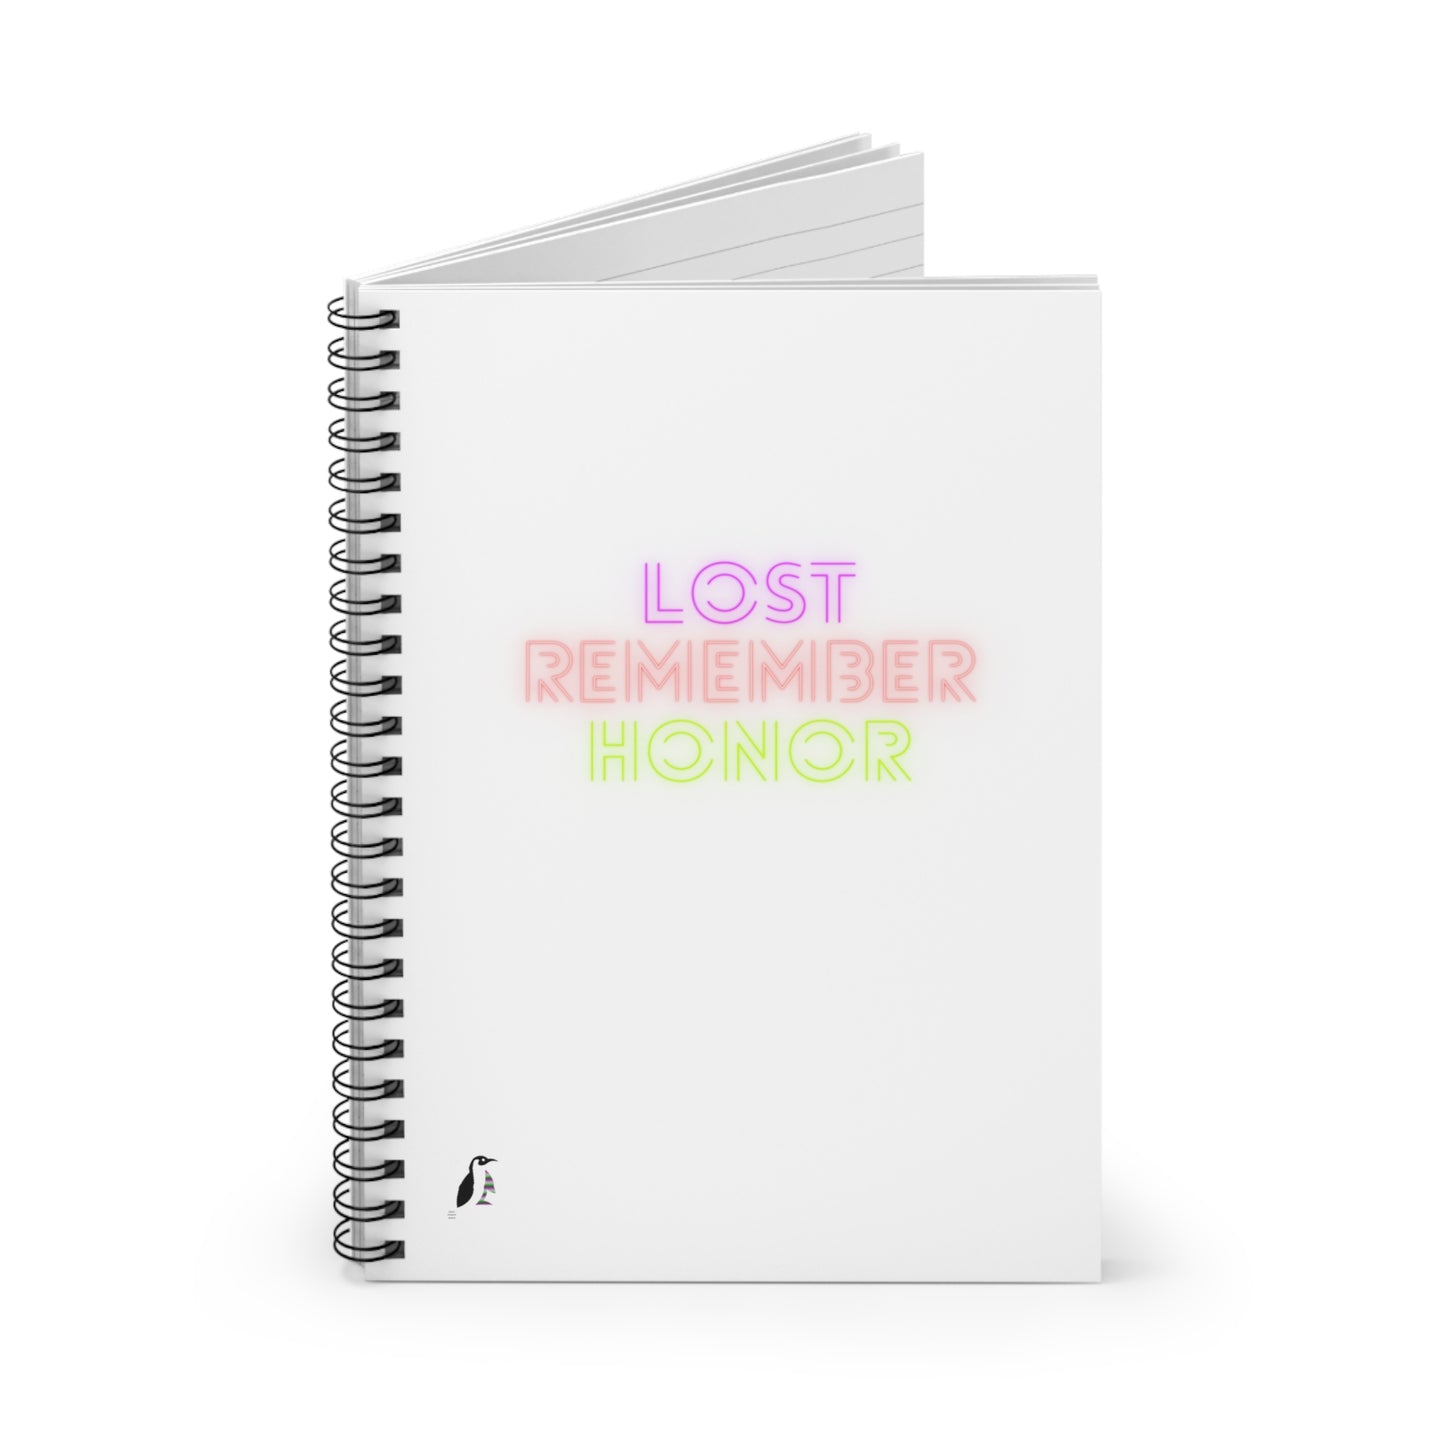 Spiral Notebook - Ruled Line: Lost Remember Honor White